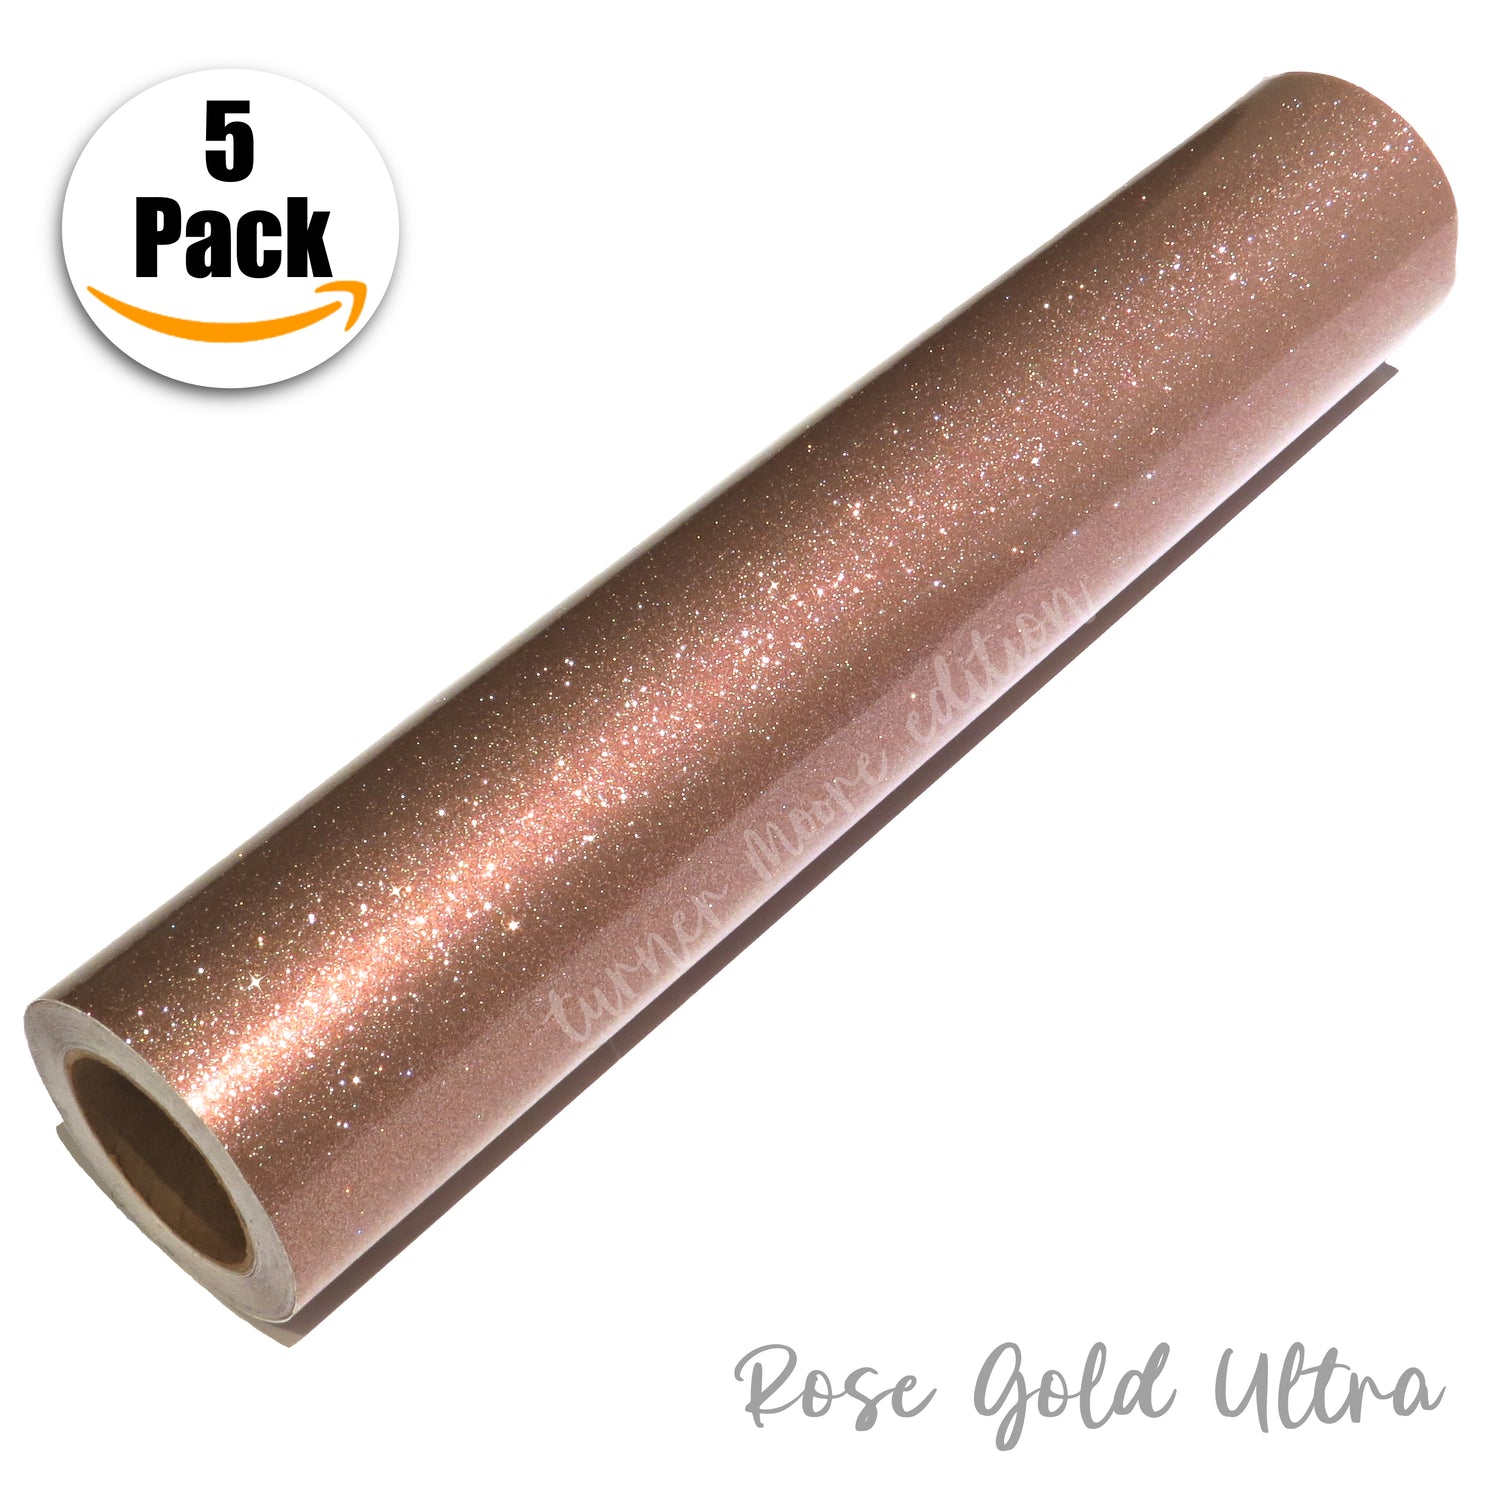 Rose Gold Glitter Vinyl Adhesive, 12x12 Ultra Glitter Vinyl Sheets for Cricut Joy Maker, Silhouette, Stickers, Decals, Permanent by Turner Moore